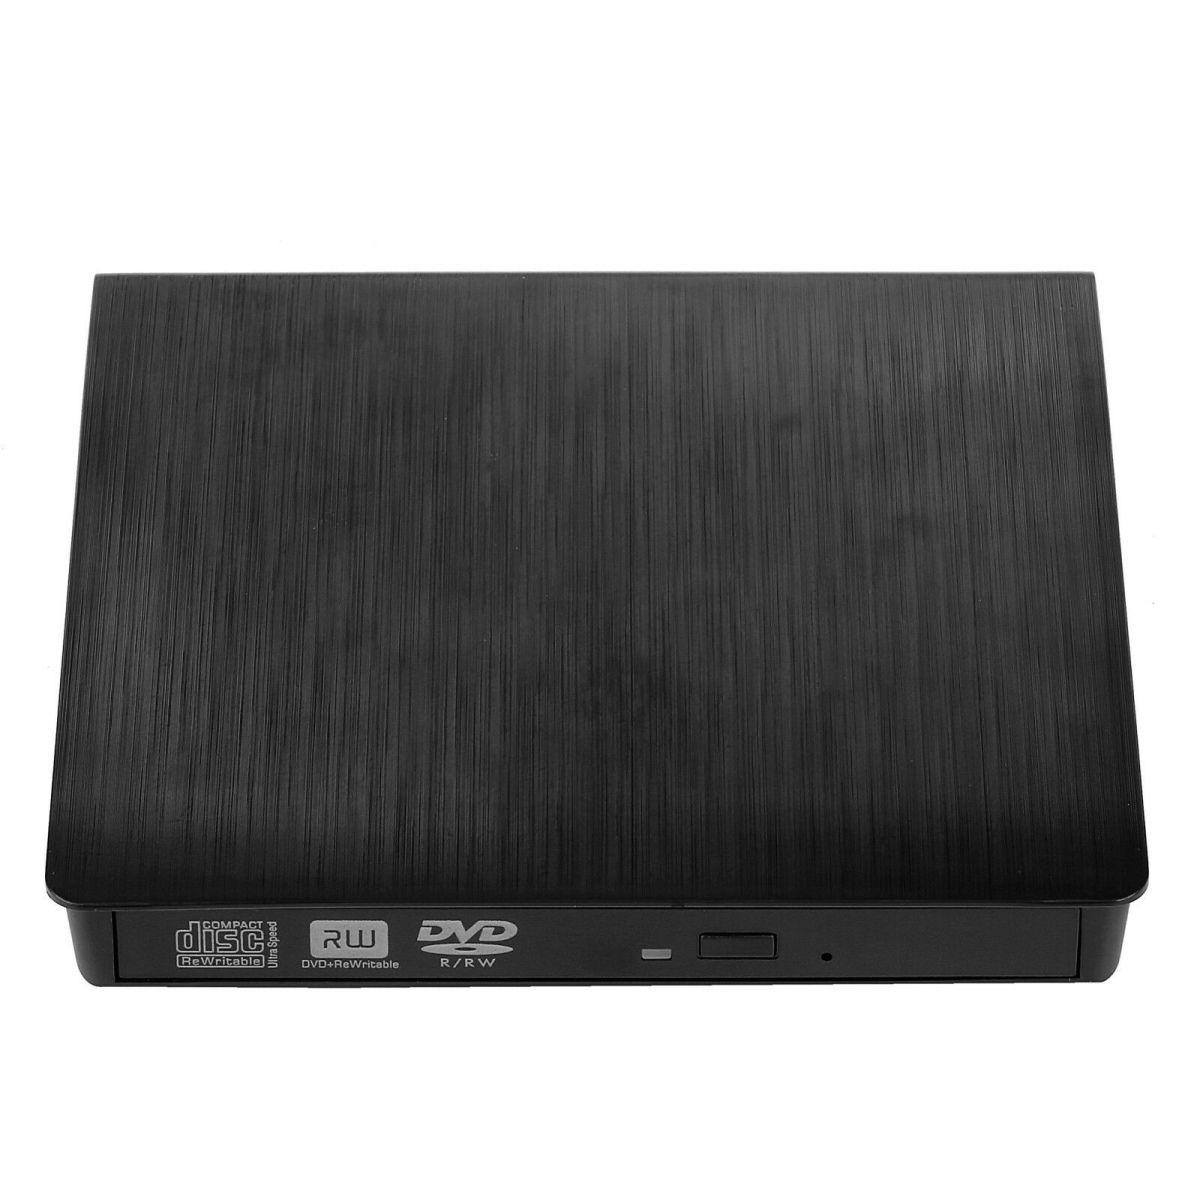 Picture of Sanoxy WHZ-373906380722-BLK Slim External USB 3.0 DVD RW CD Writer Drive Burner Reader Player for Laptop PC